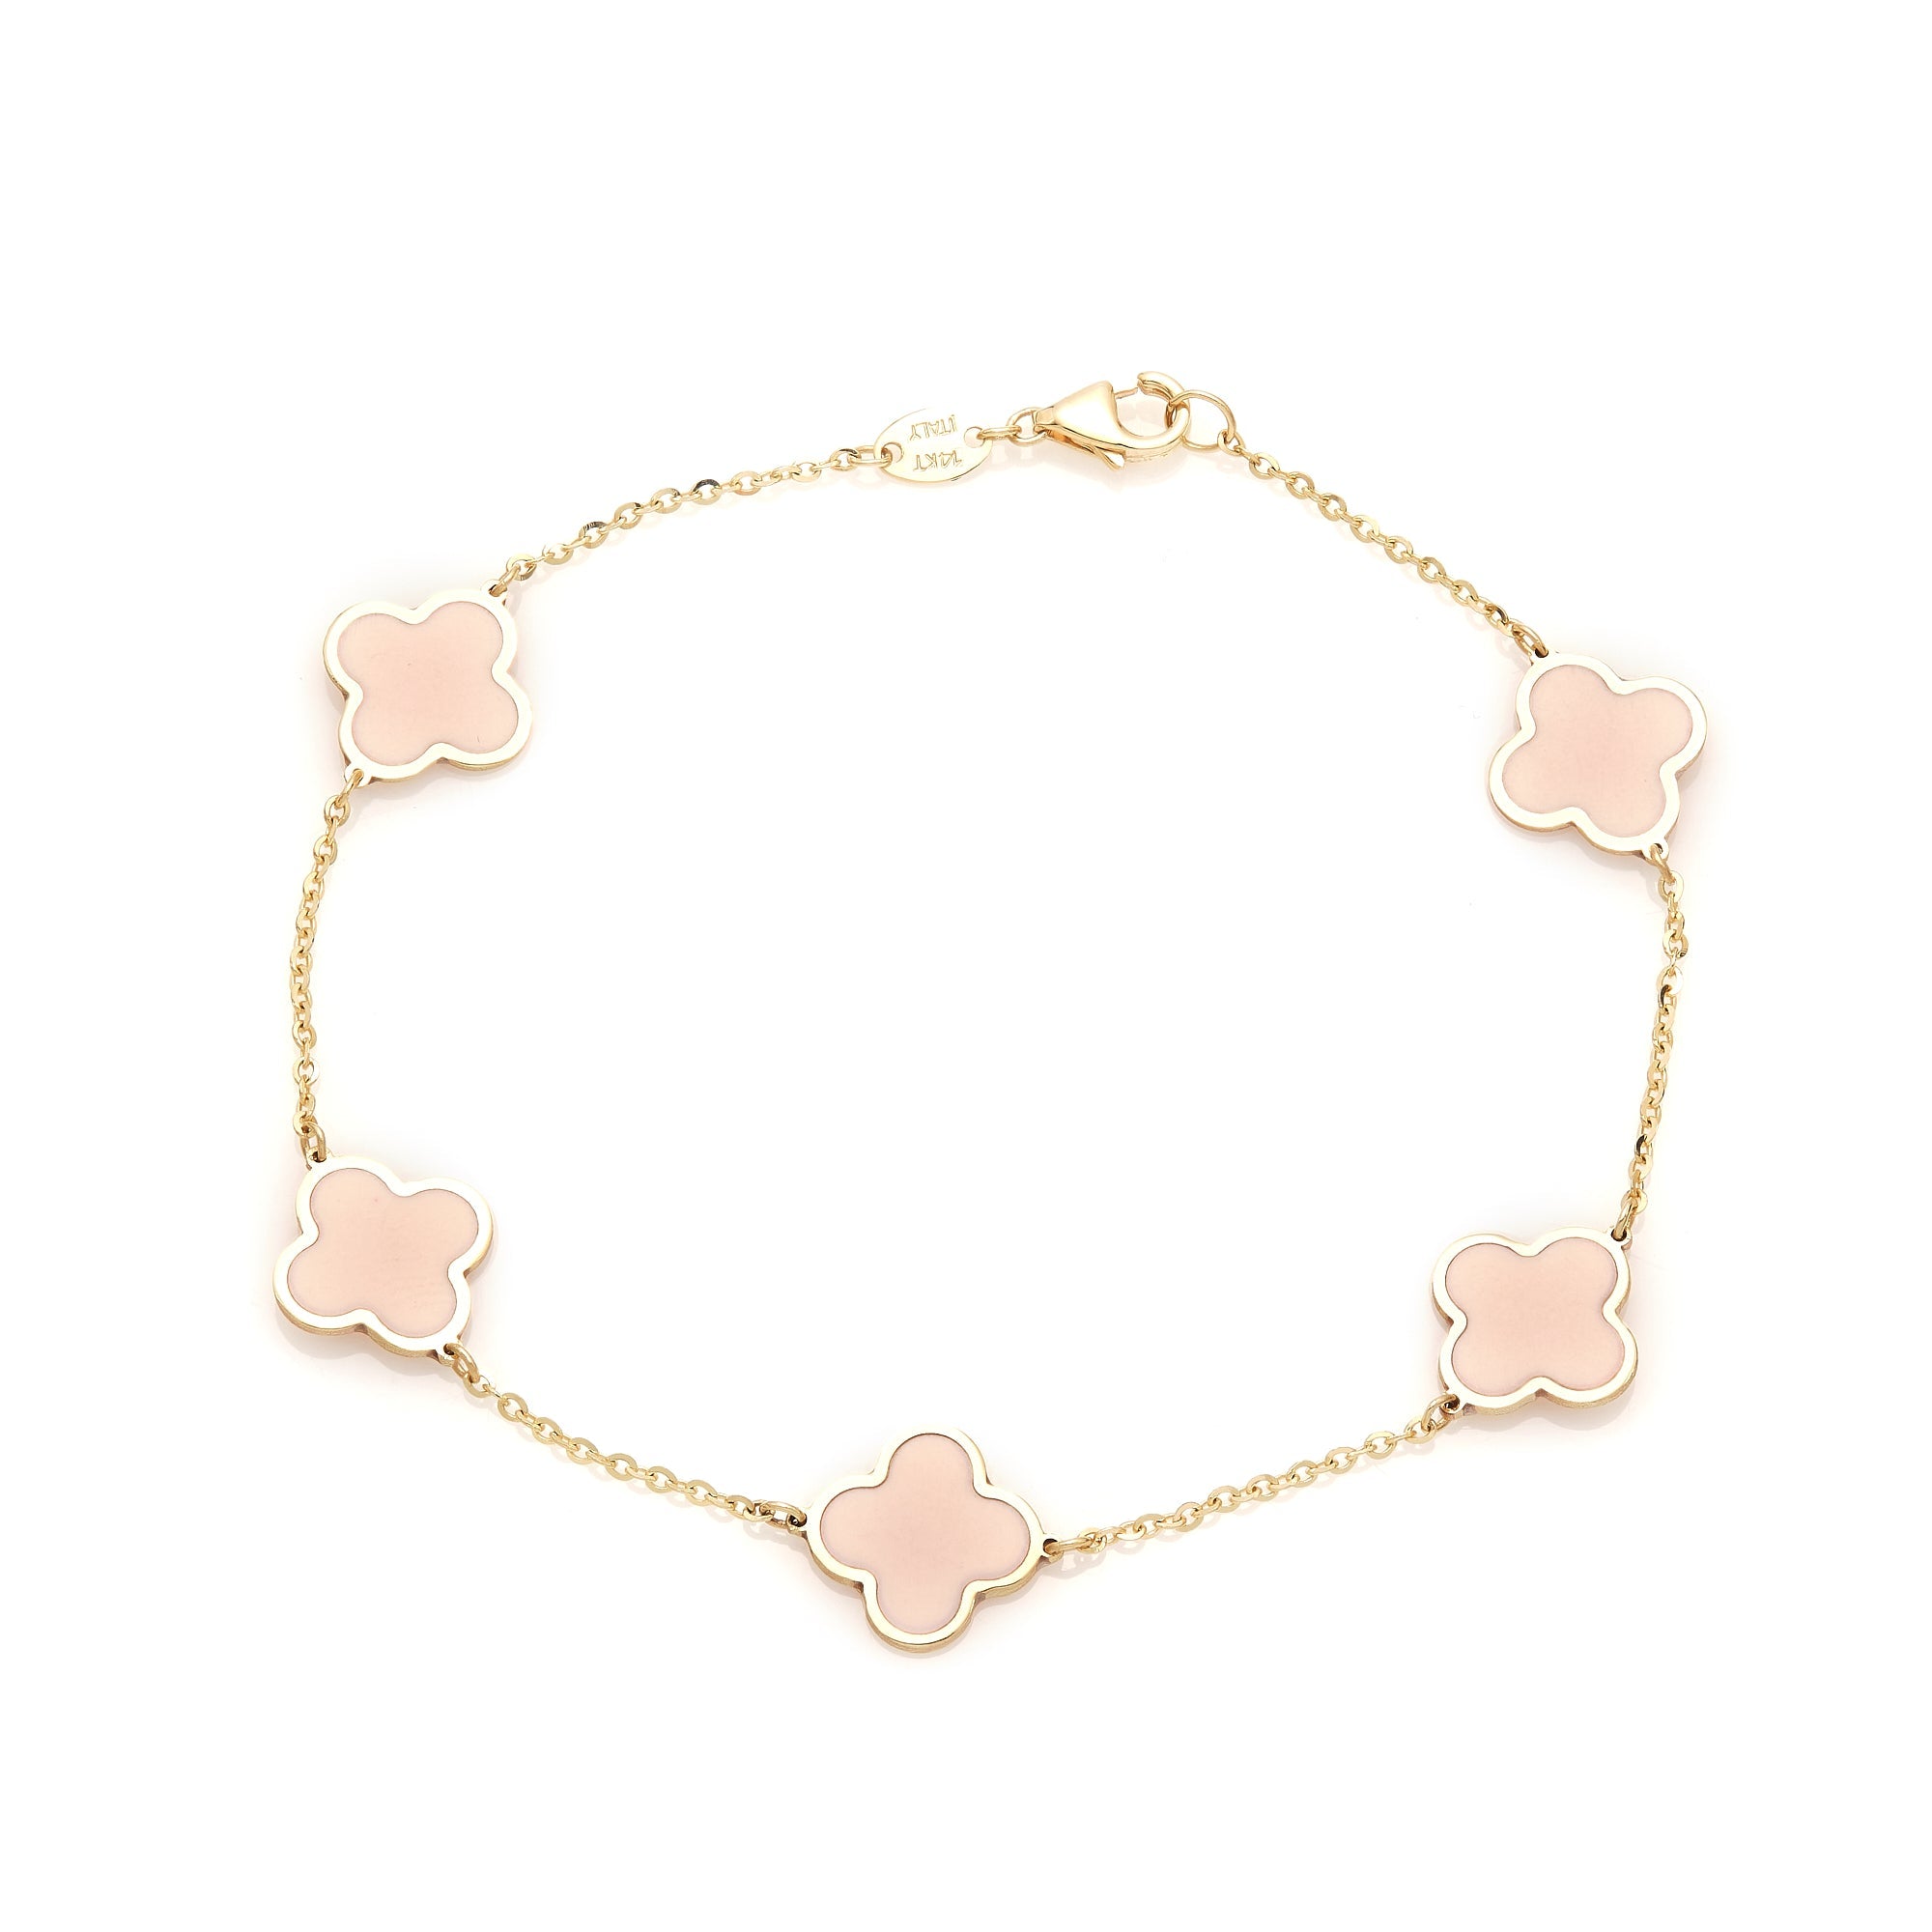 Color Blossom Necklace, Pink Gold, White Gold, Pink Opal, White